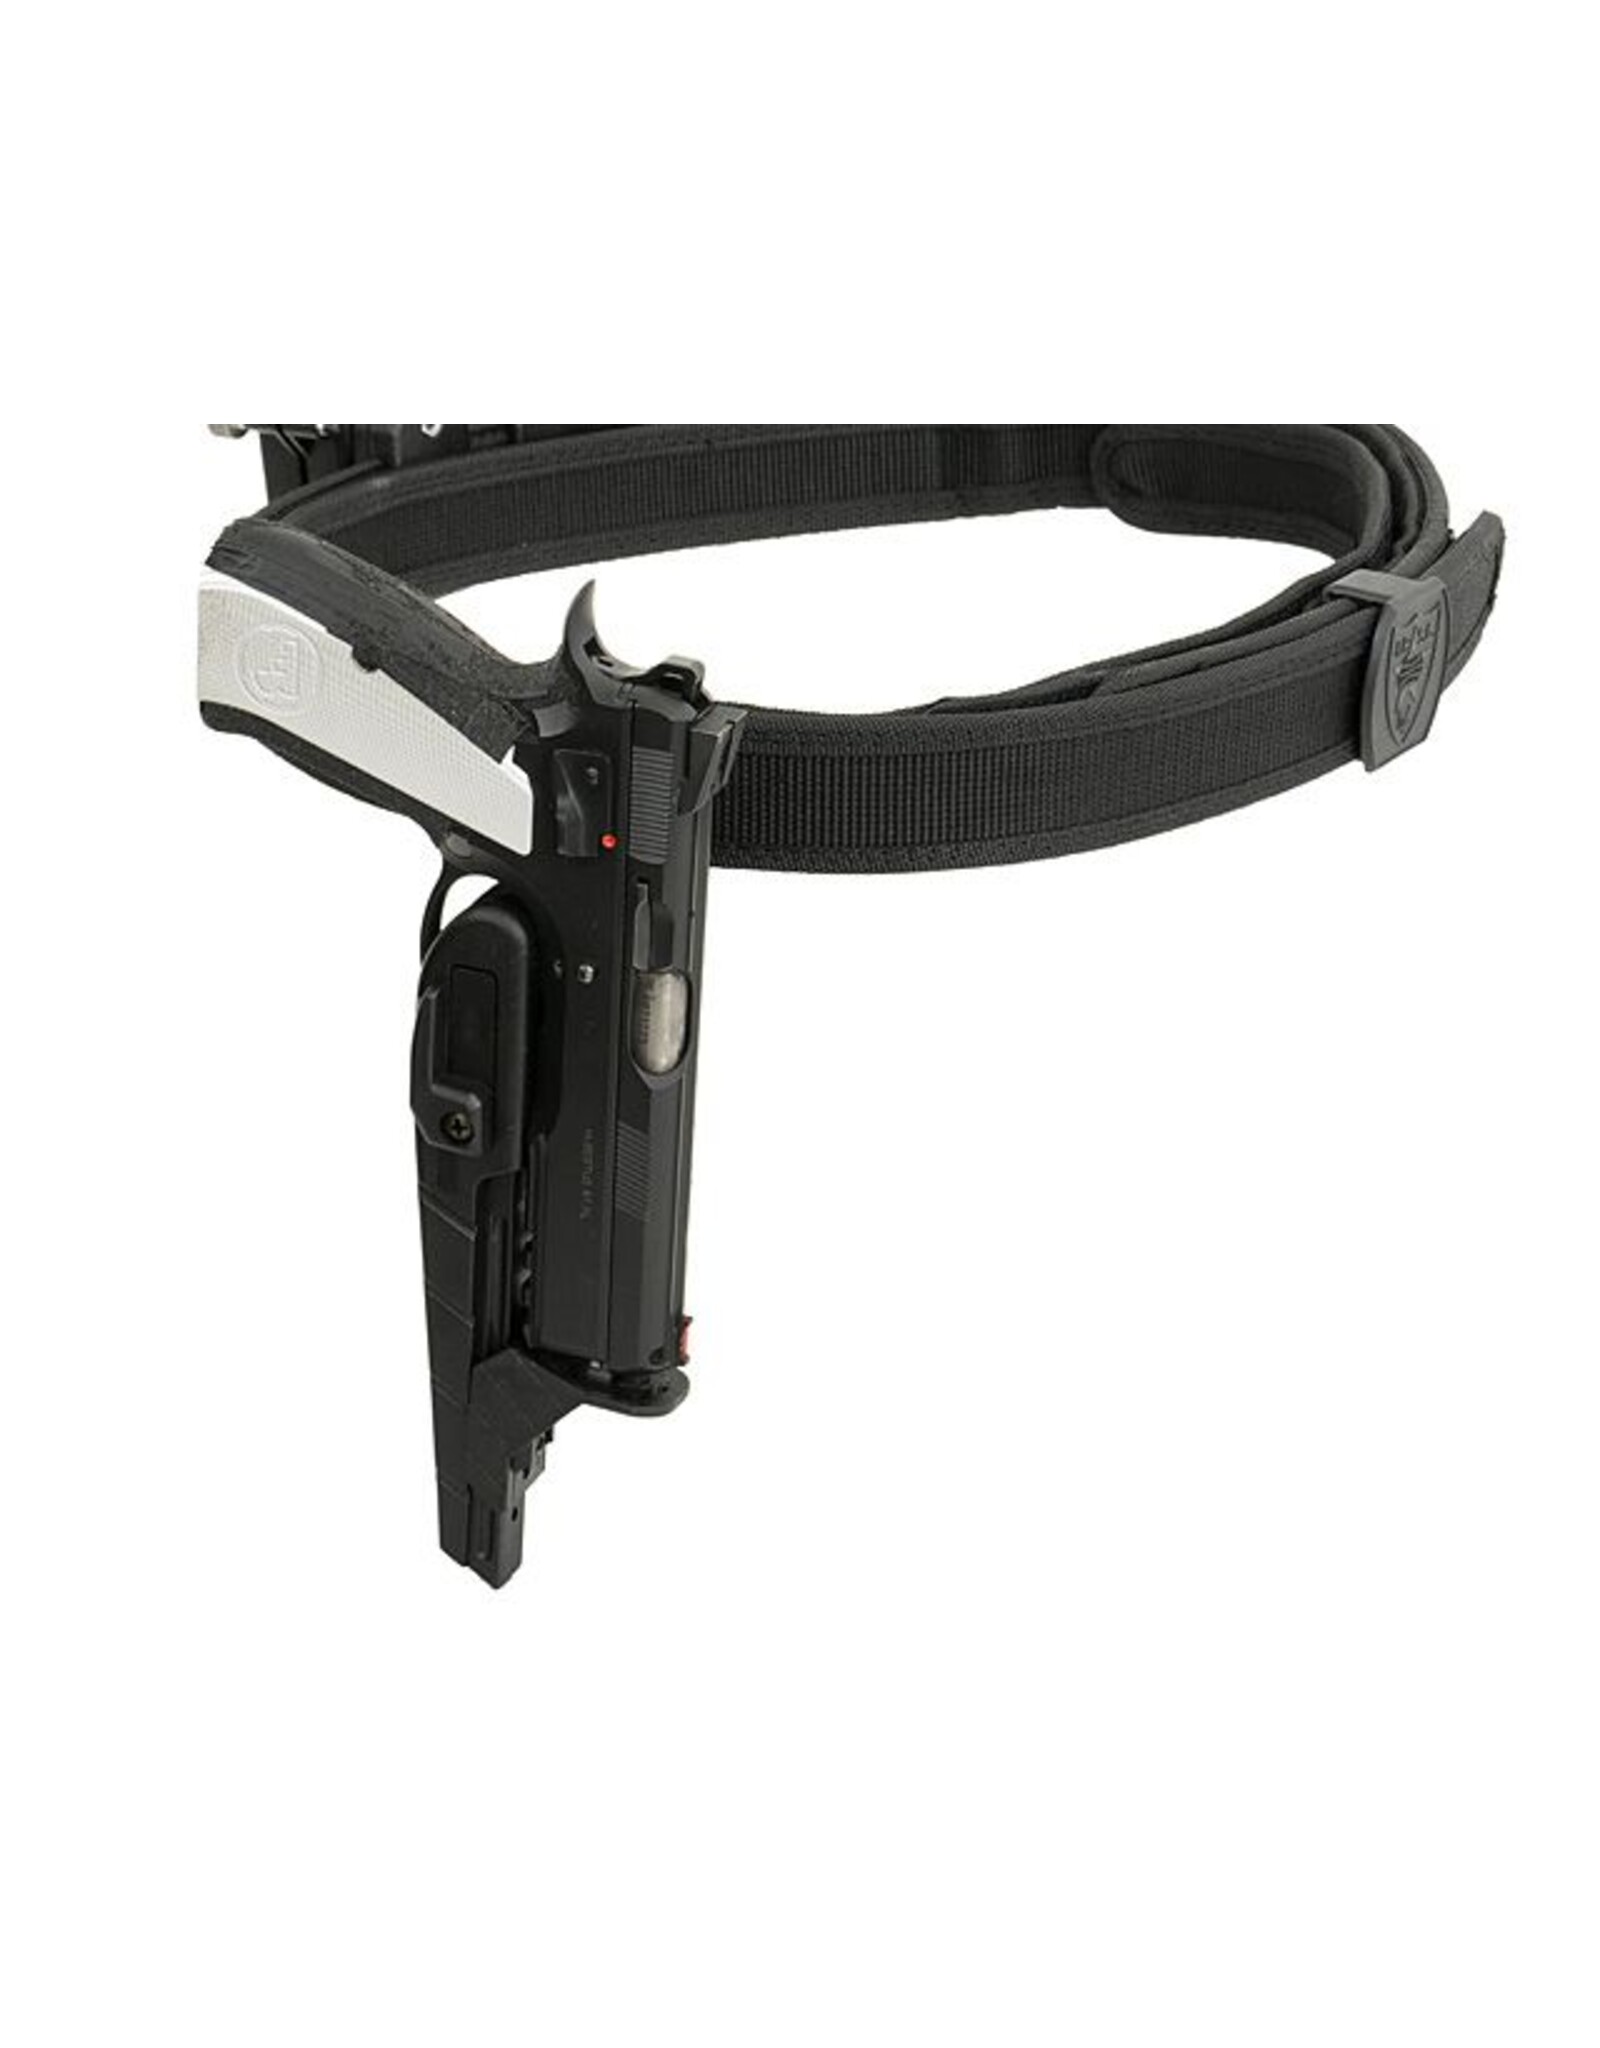 Universal Fit IPSC holster